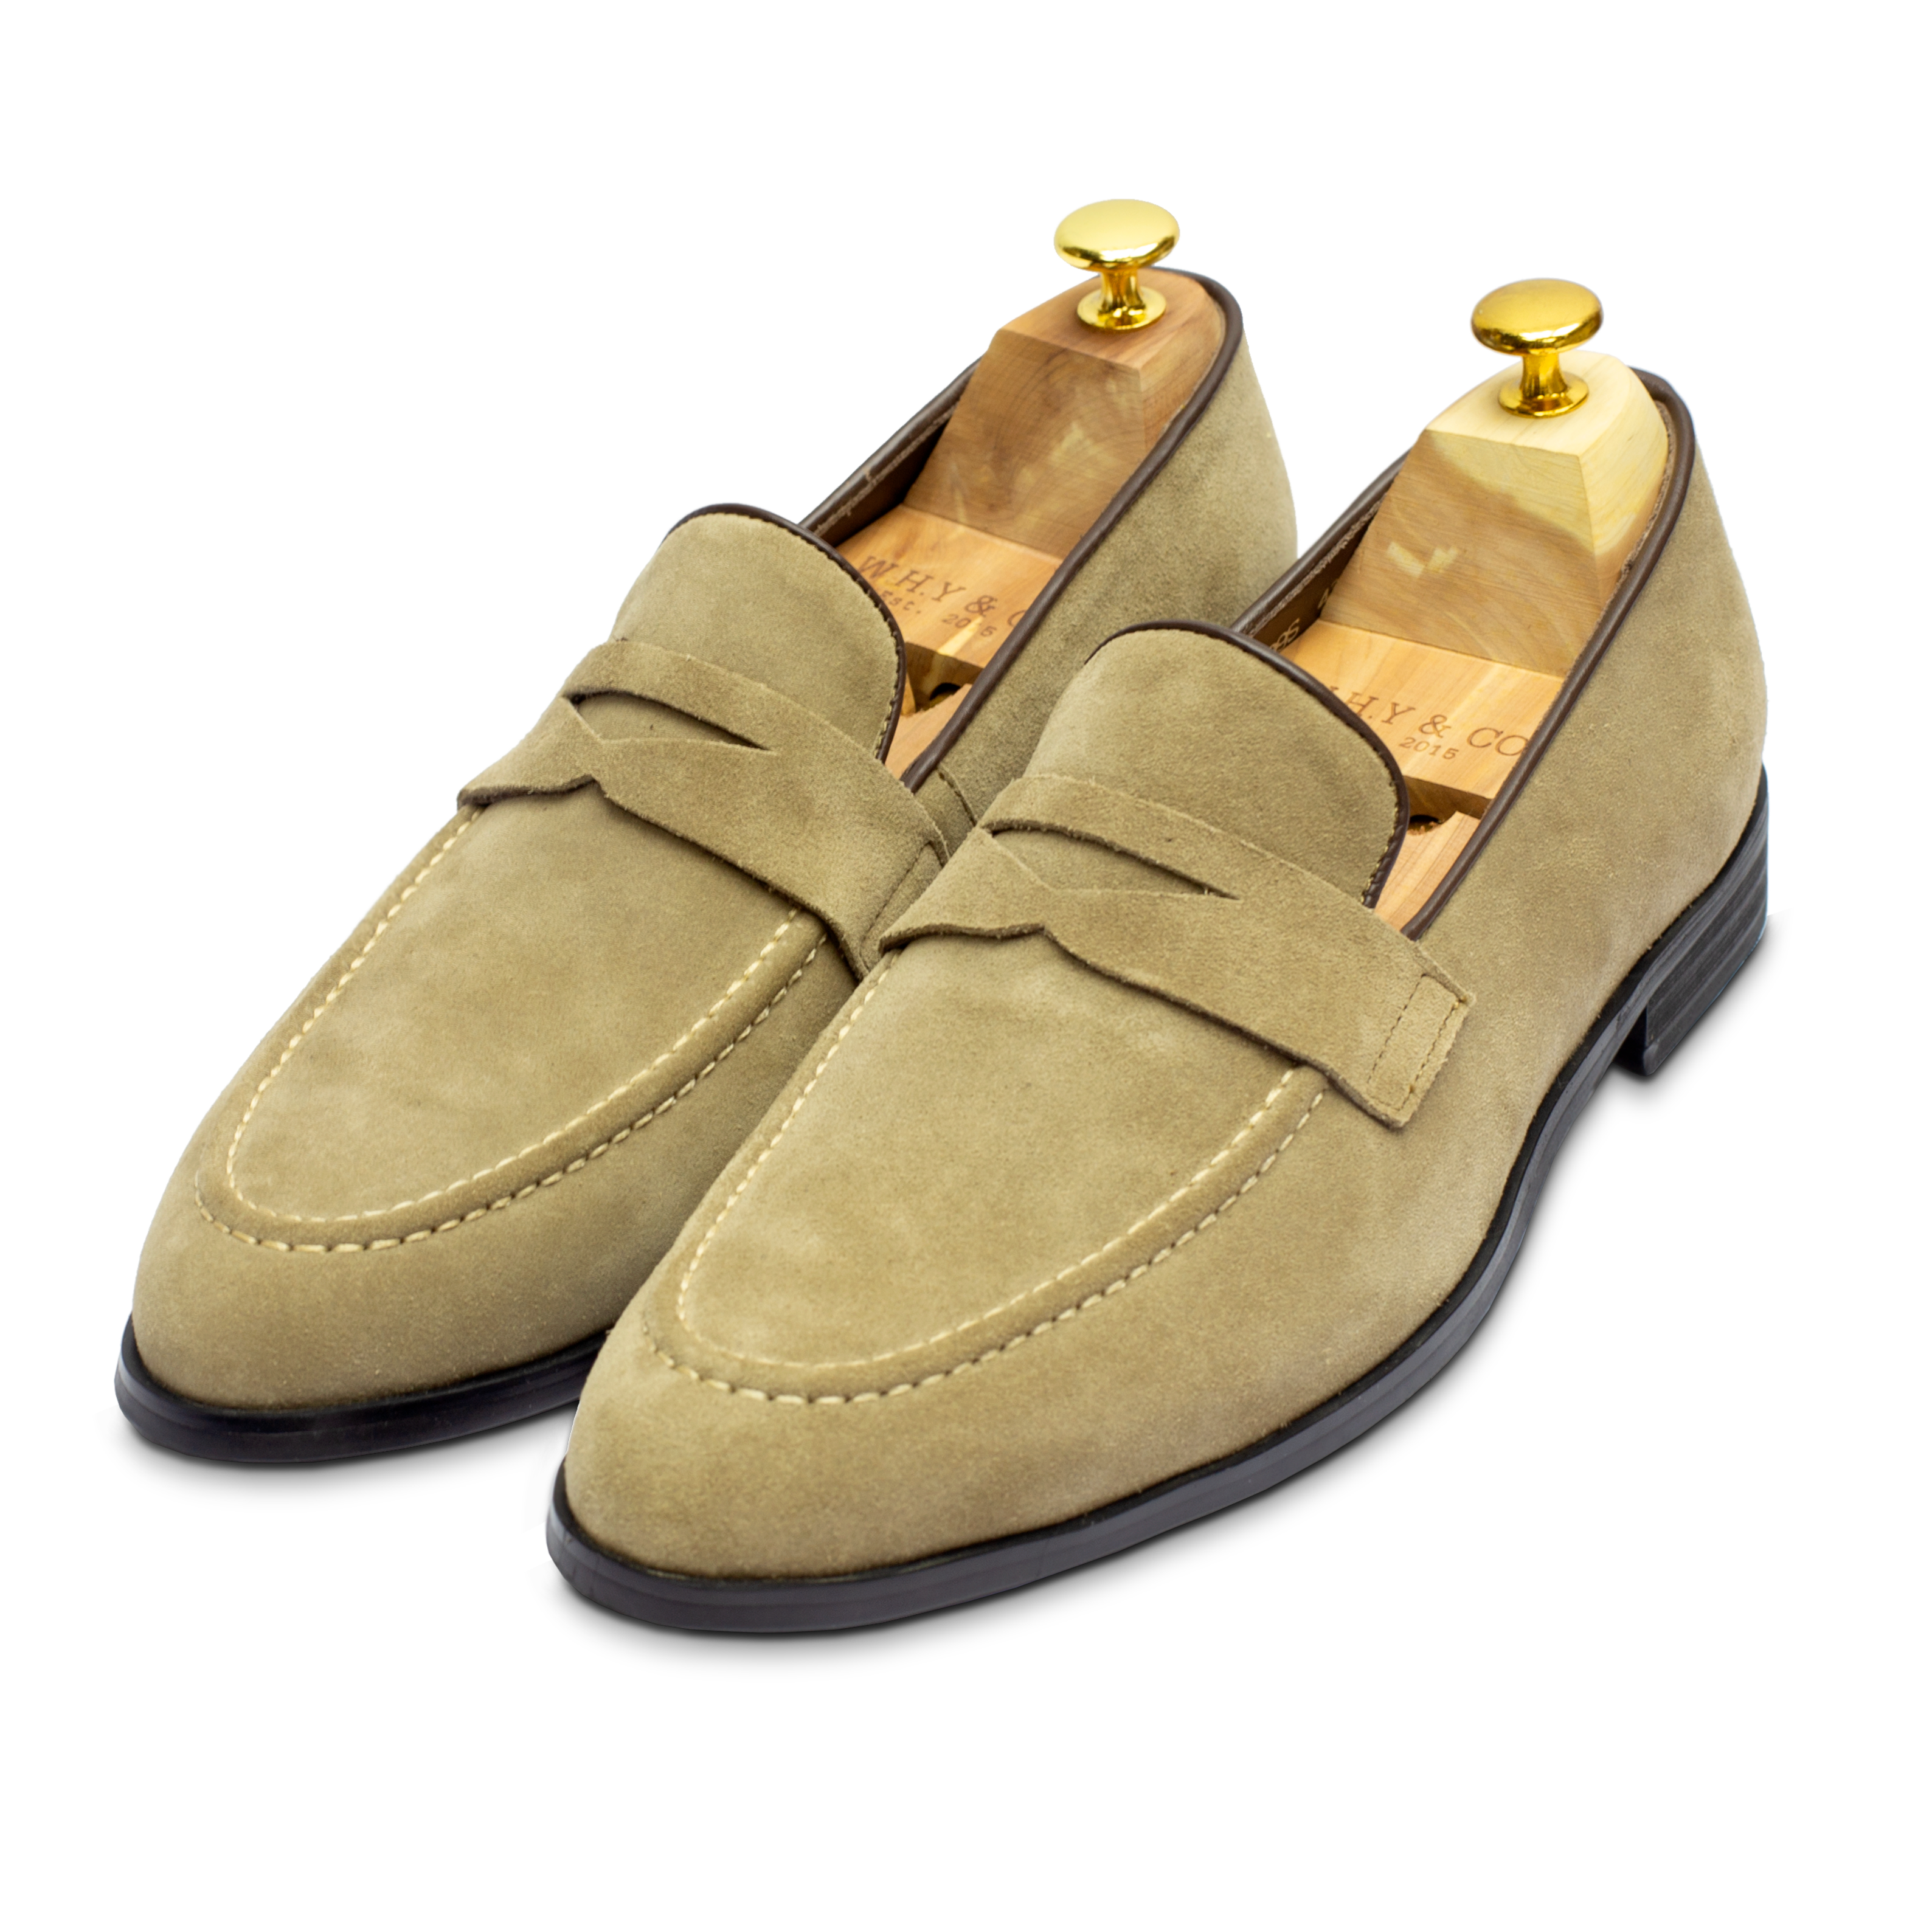 whyandco Penny Loafers Tobacco